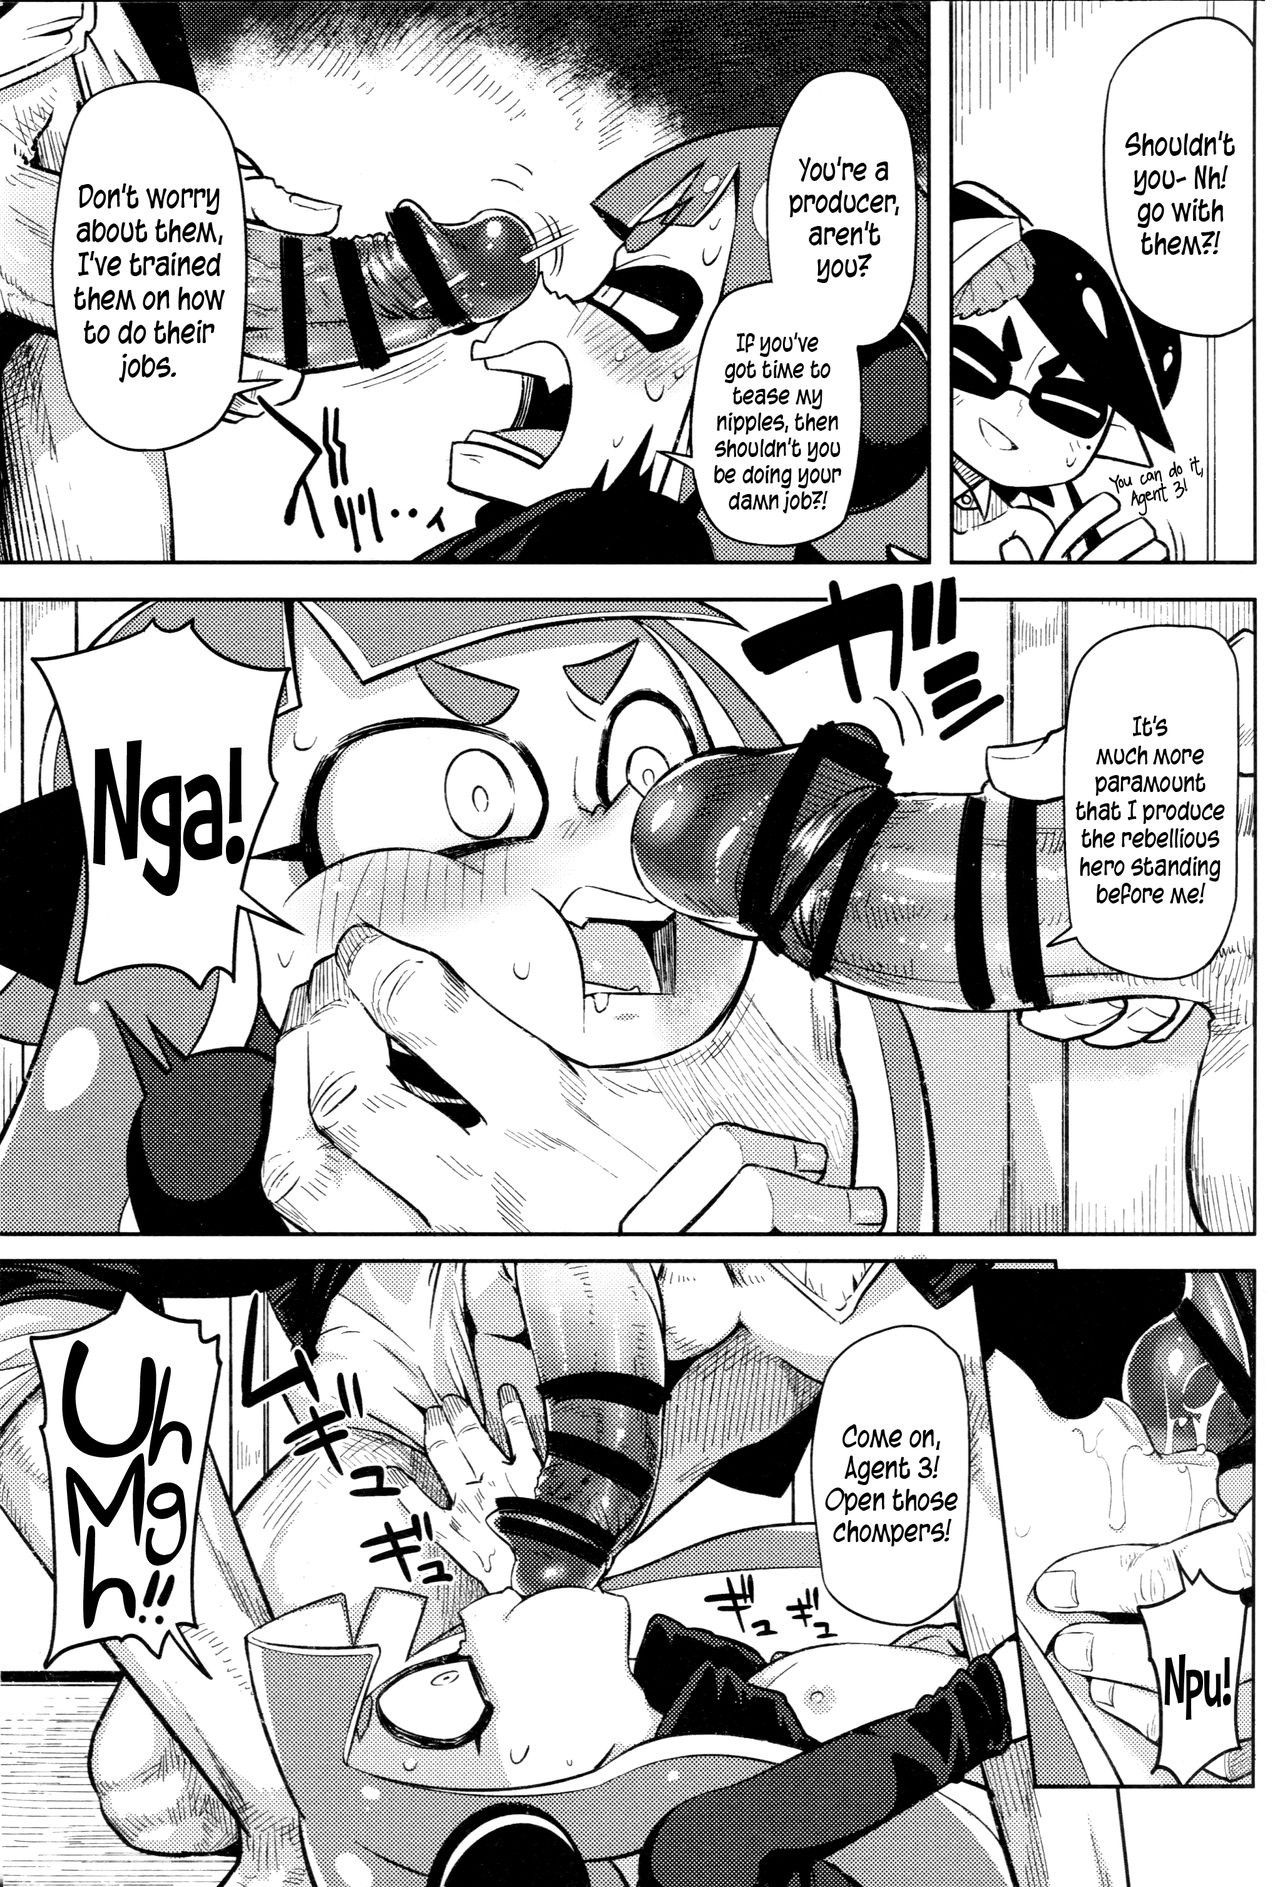 Hero by a Hair's Breadth hentai manga picture 11